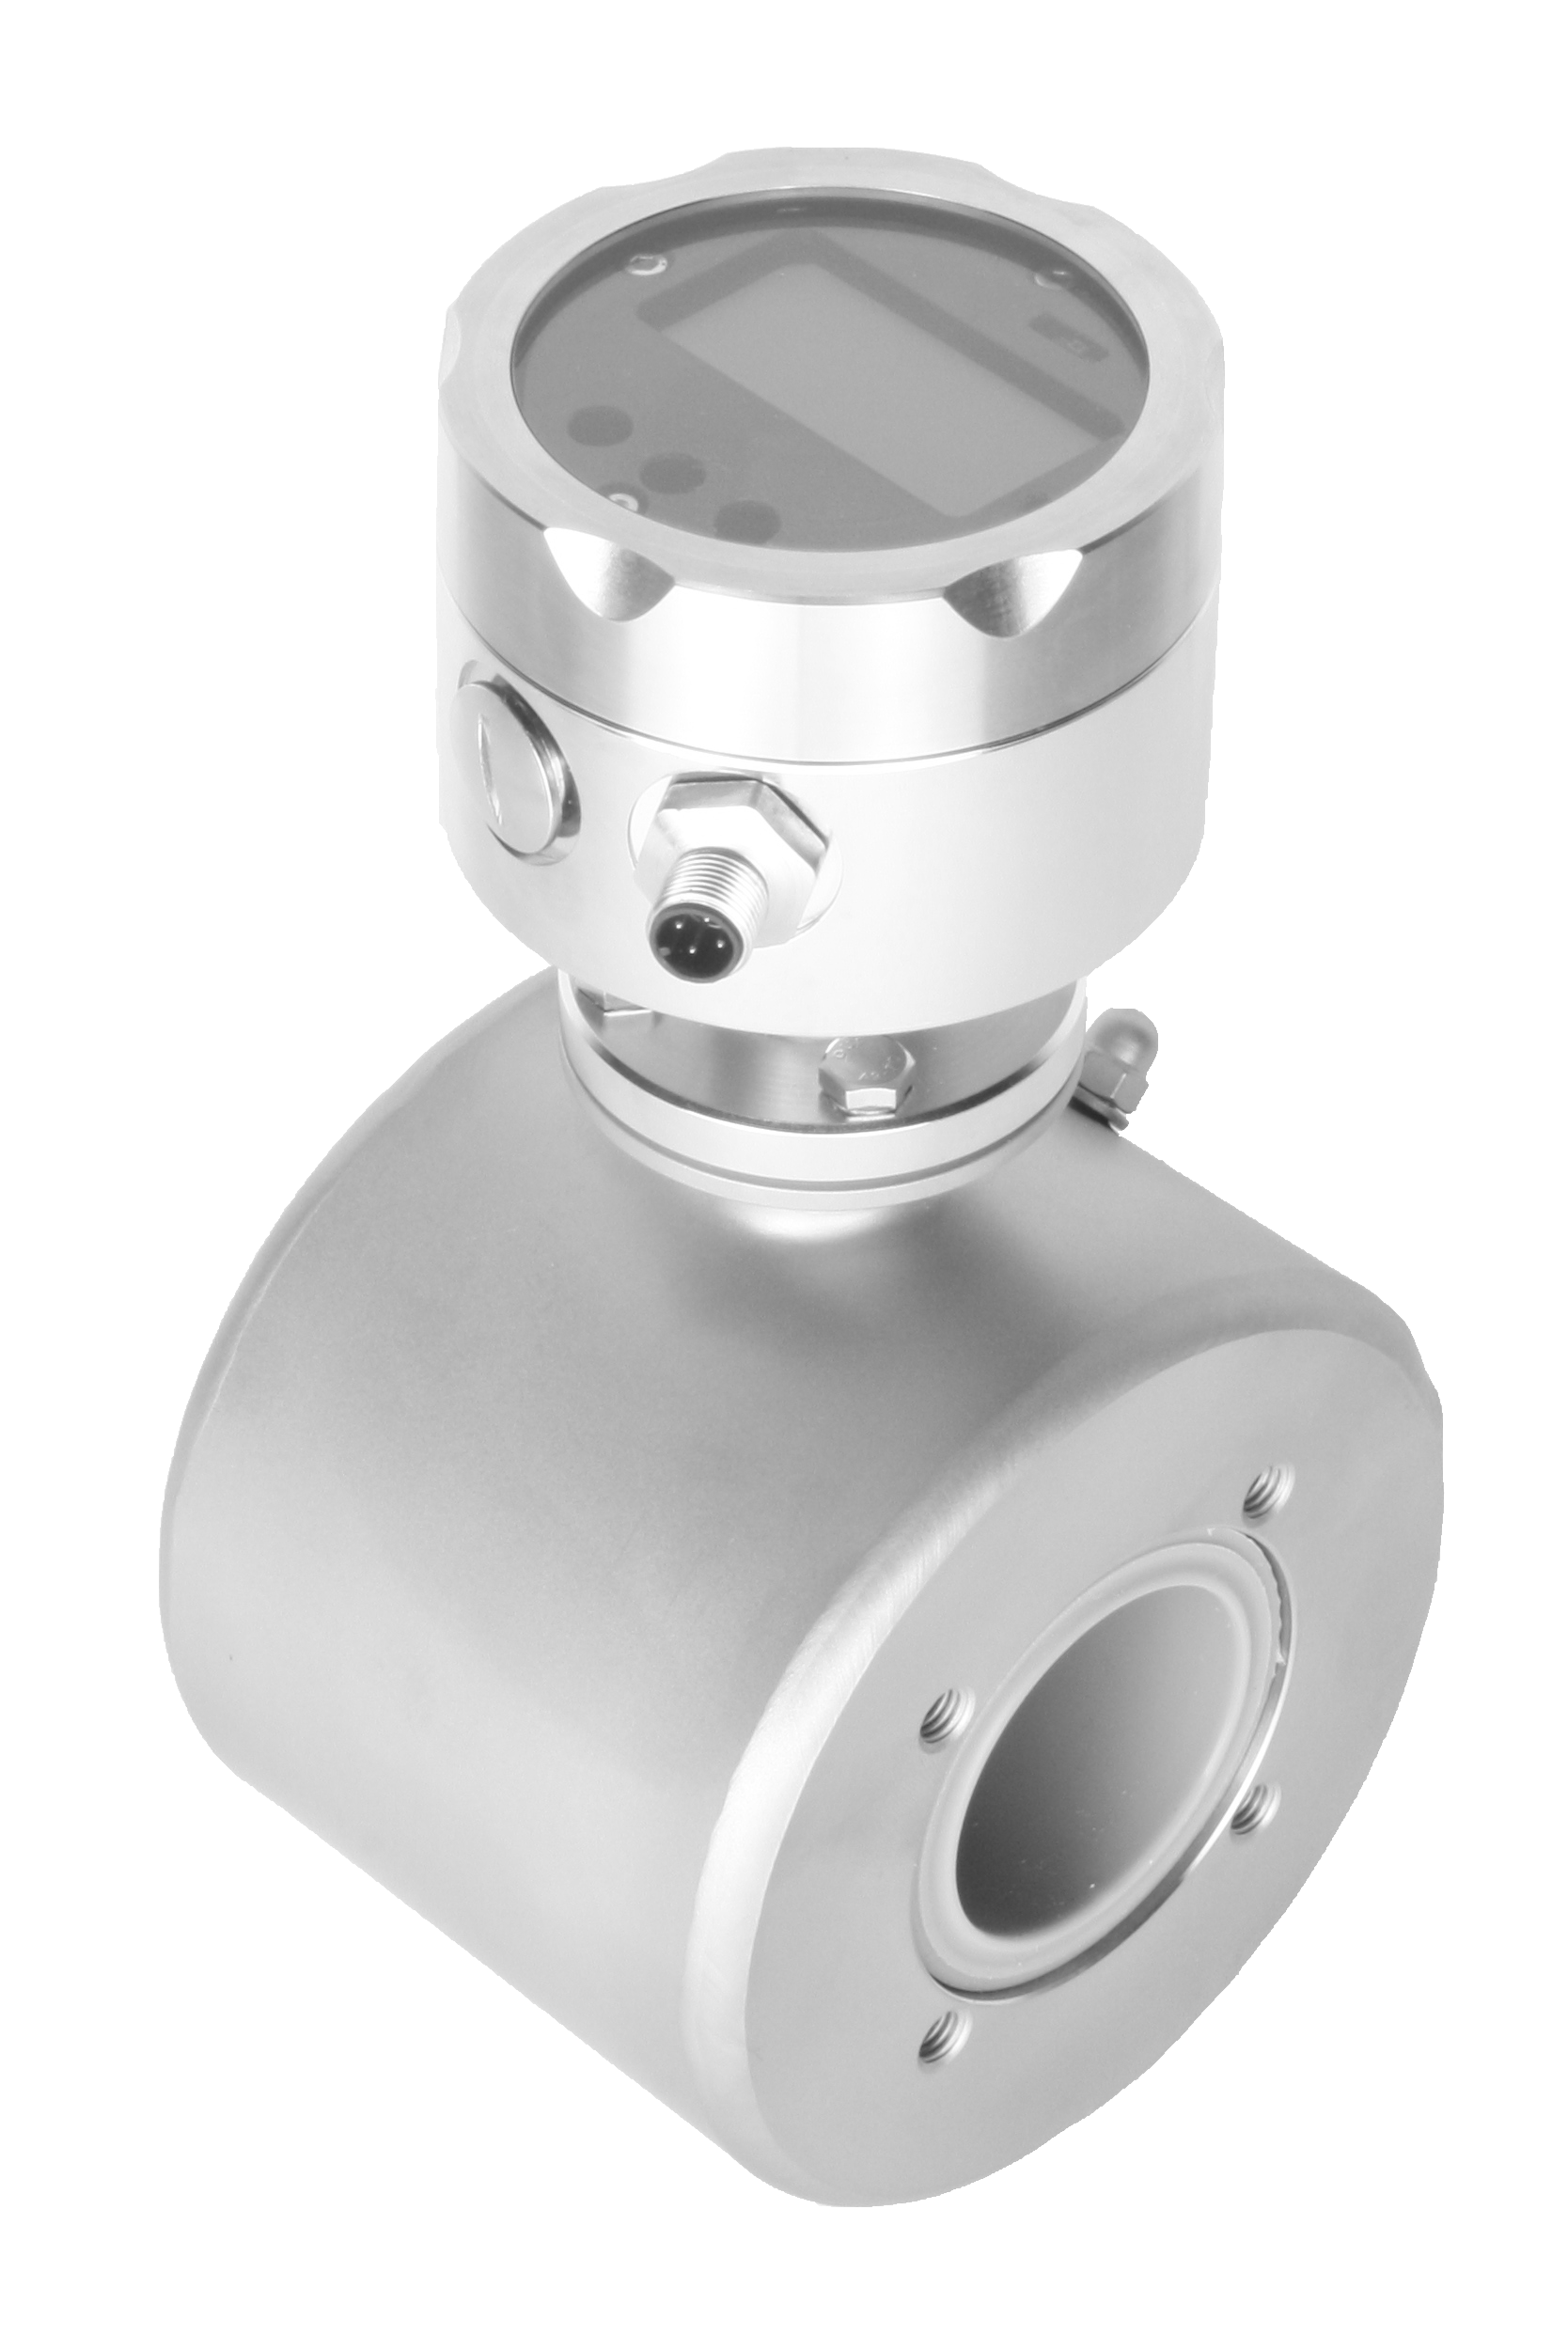 Quality requires precision – GEA’s CMAG™ flow meter provides accurate measurement data for sensitive production processes